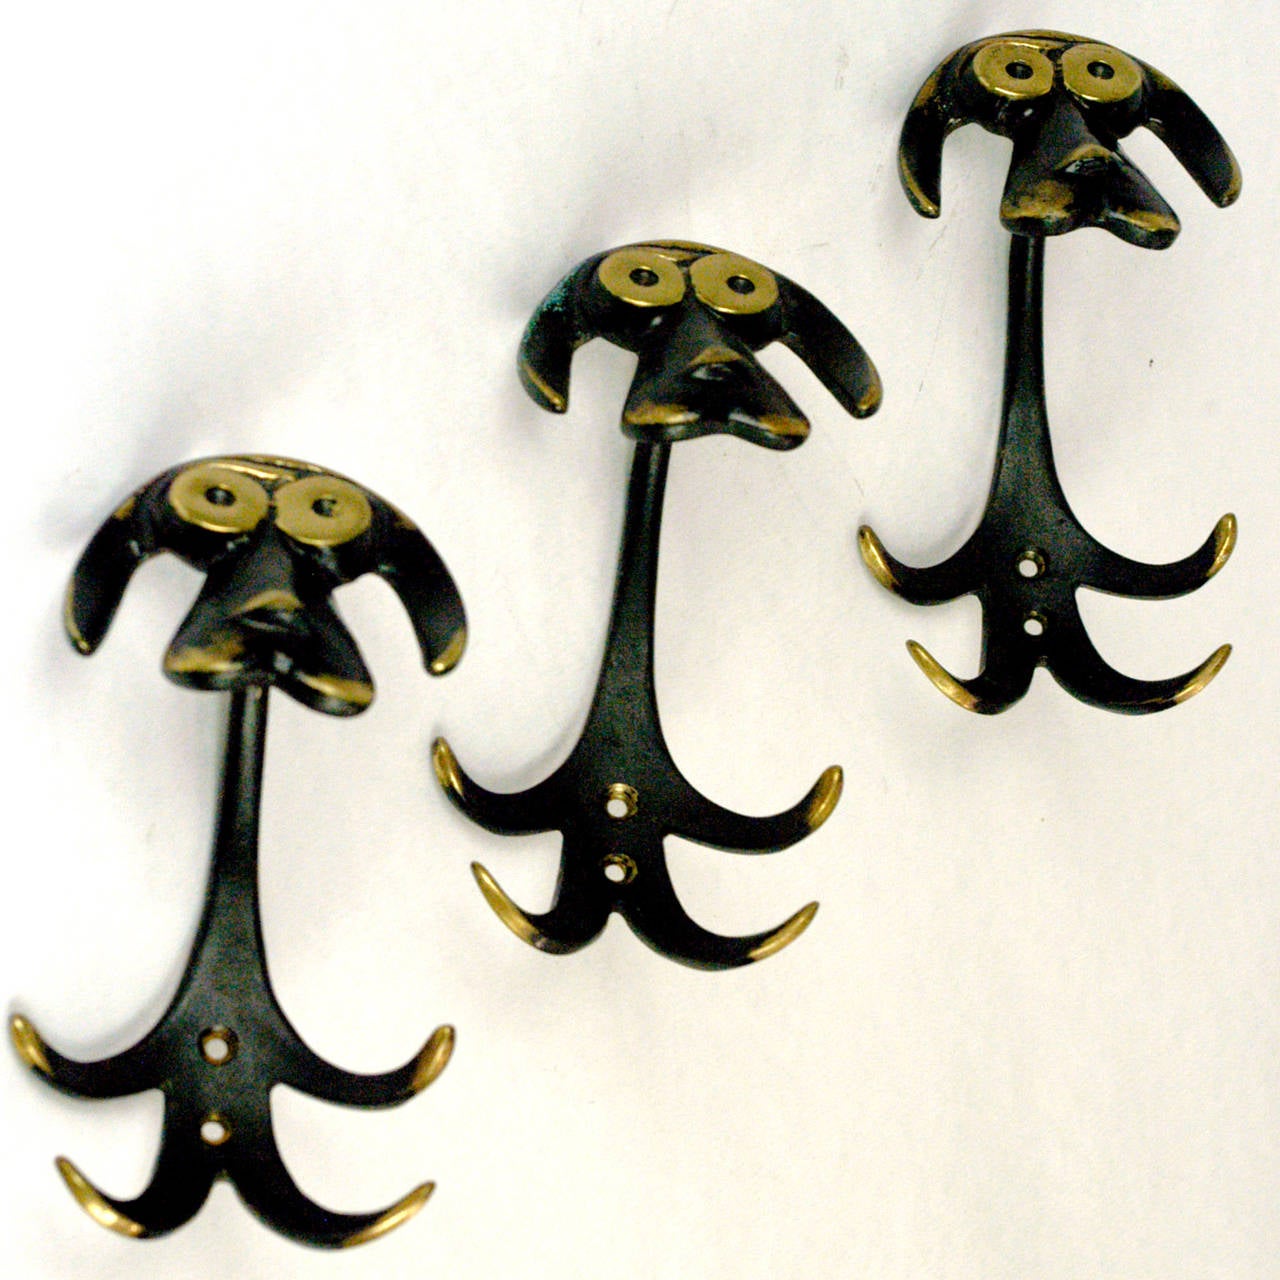 Amazing dog shaped, partly black finished brass hooks by the Austrian artist Walter Bosse
Also available as single.
This set is a characteristic work of the Austrian midcentury artist and designer Walter Bosse, who is famous for his hümoristic